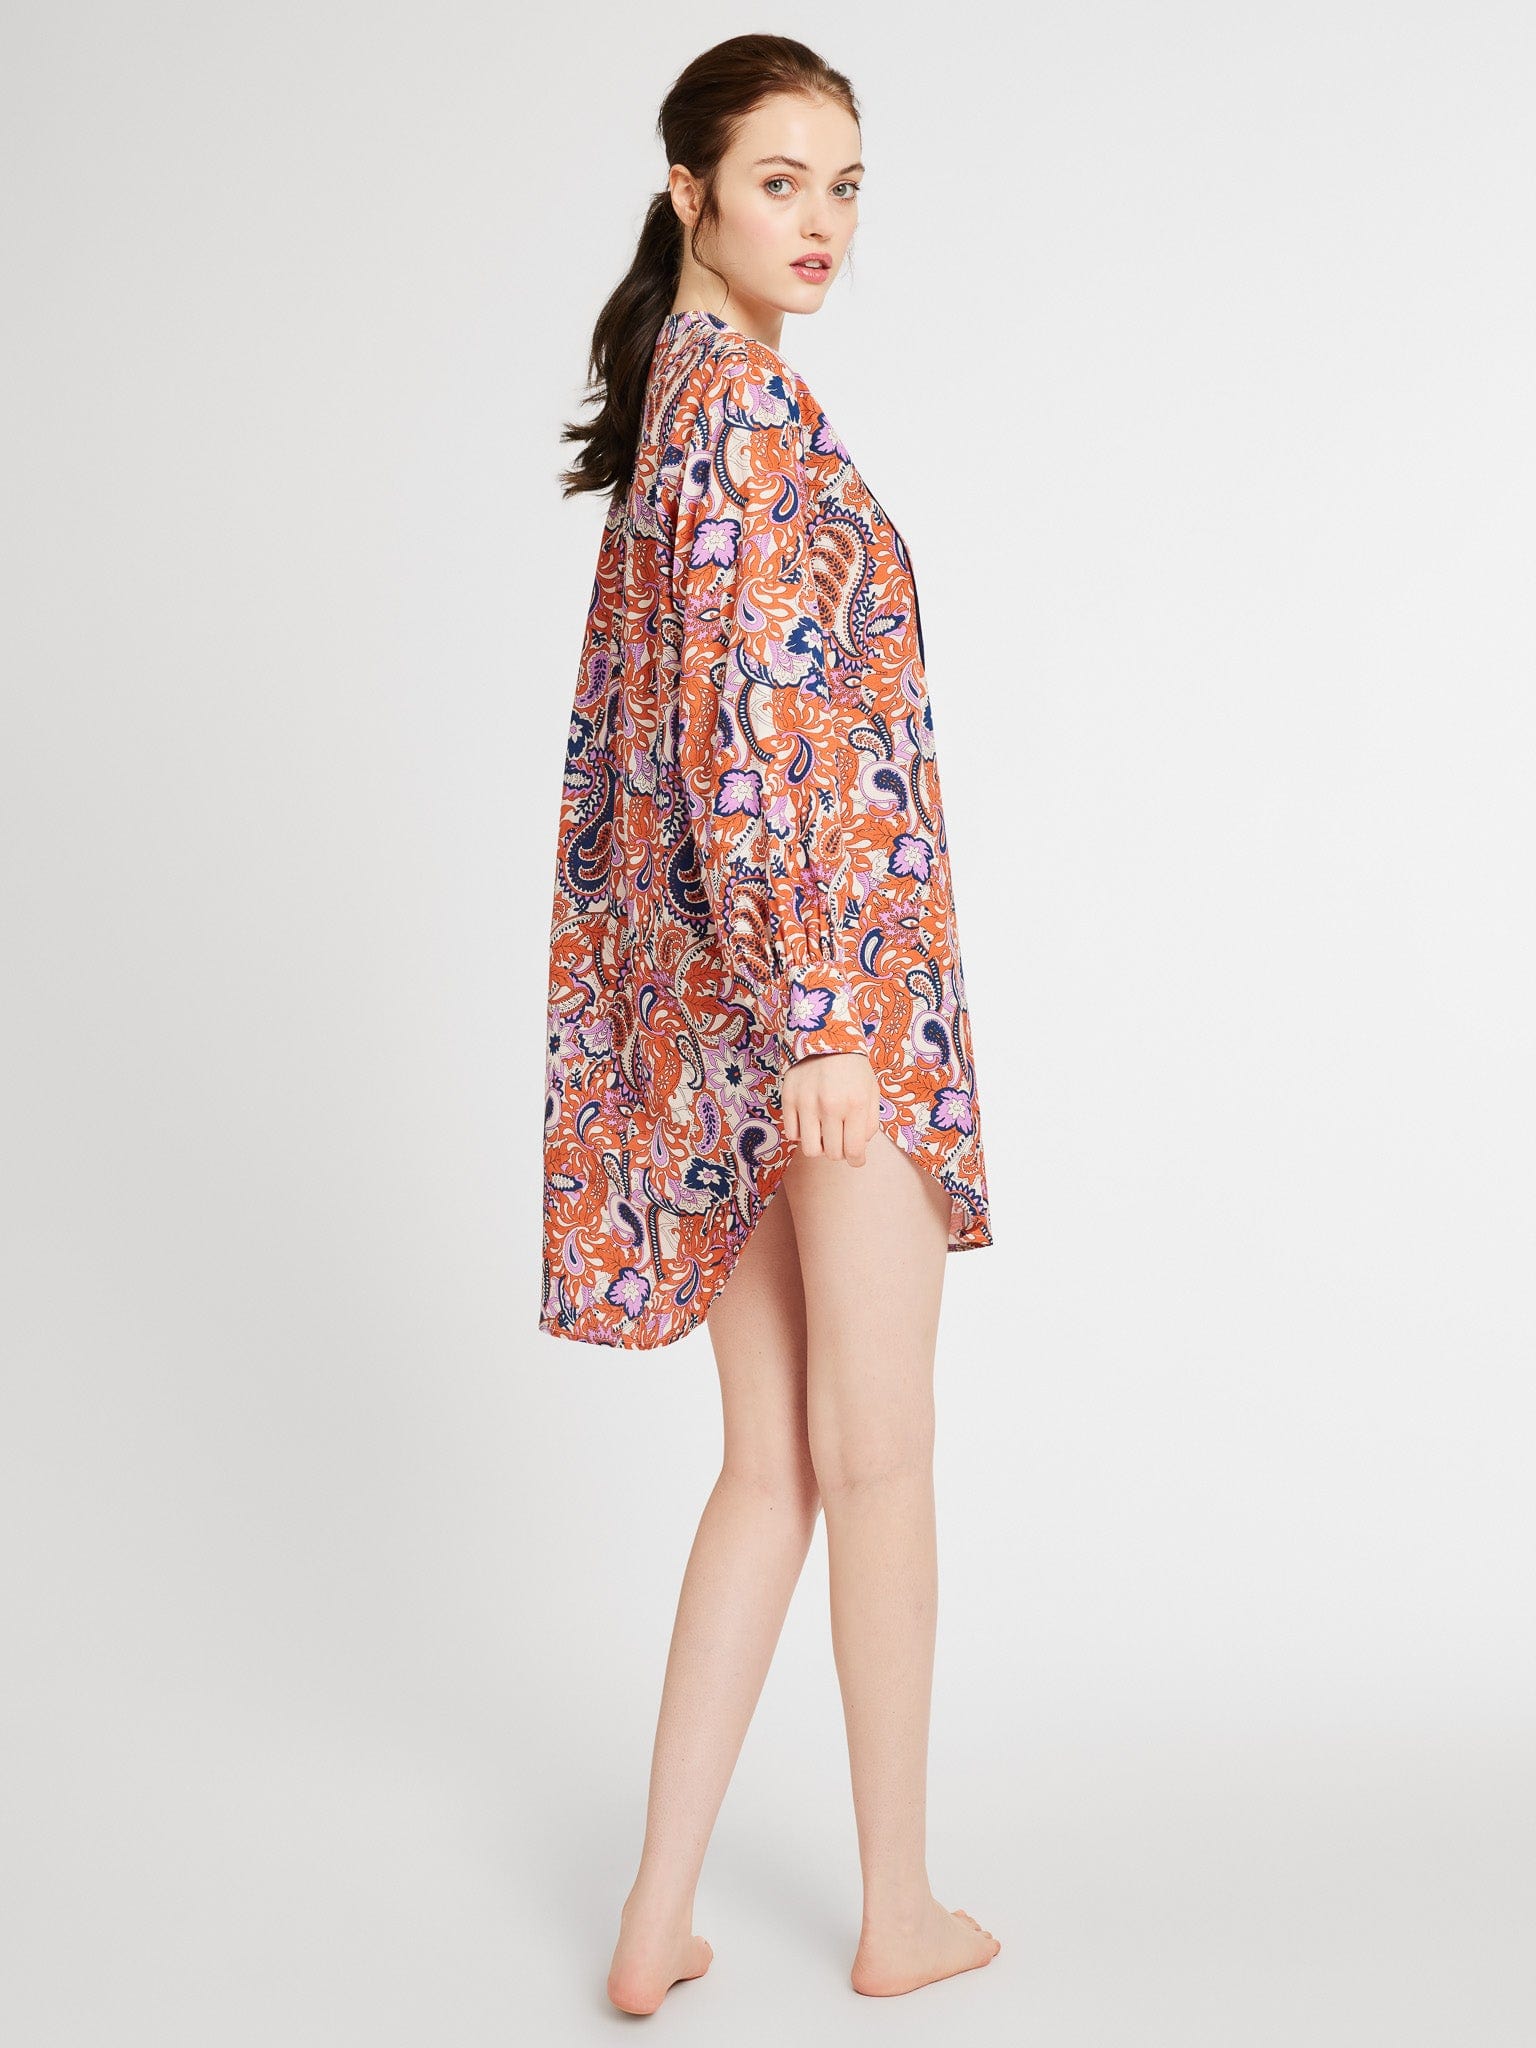 MILLE Clothing Jeanne Dress in Tangier